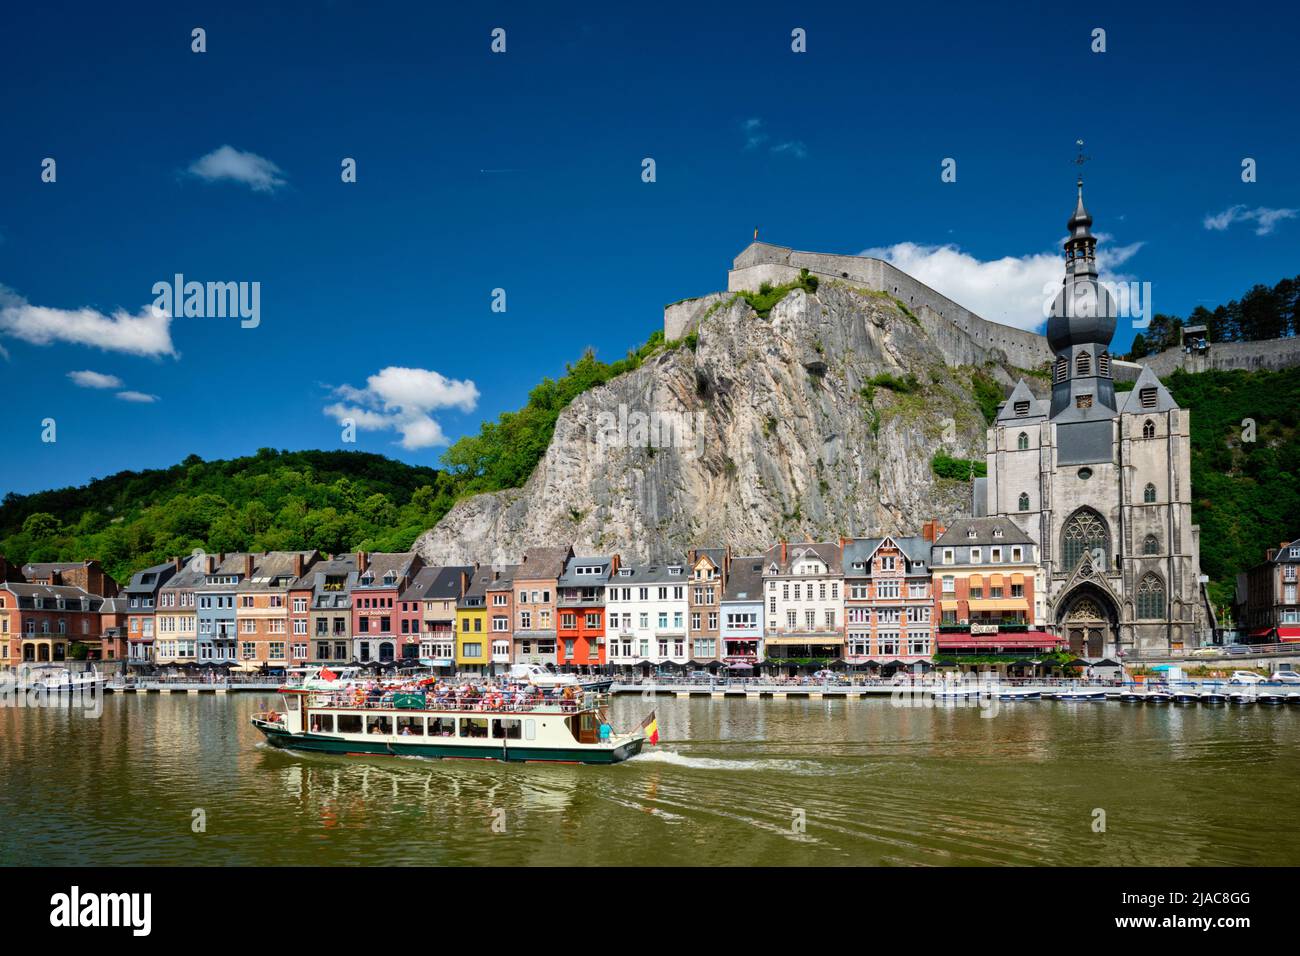 View of Dinant city over the Meuse river. Dinant, Belgium Stock Photo